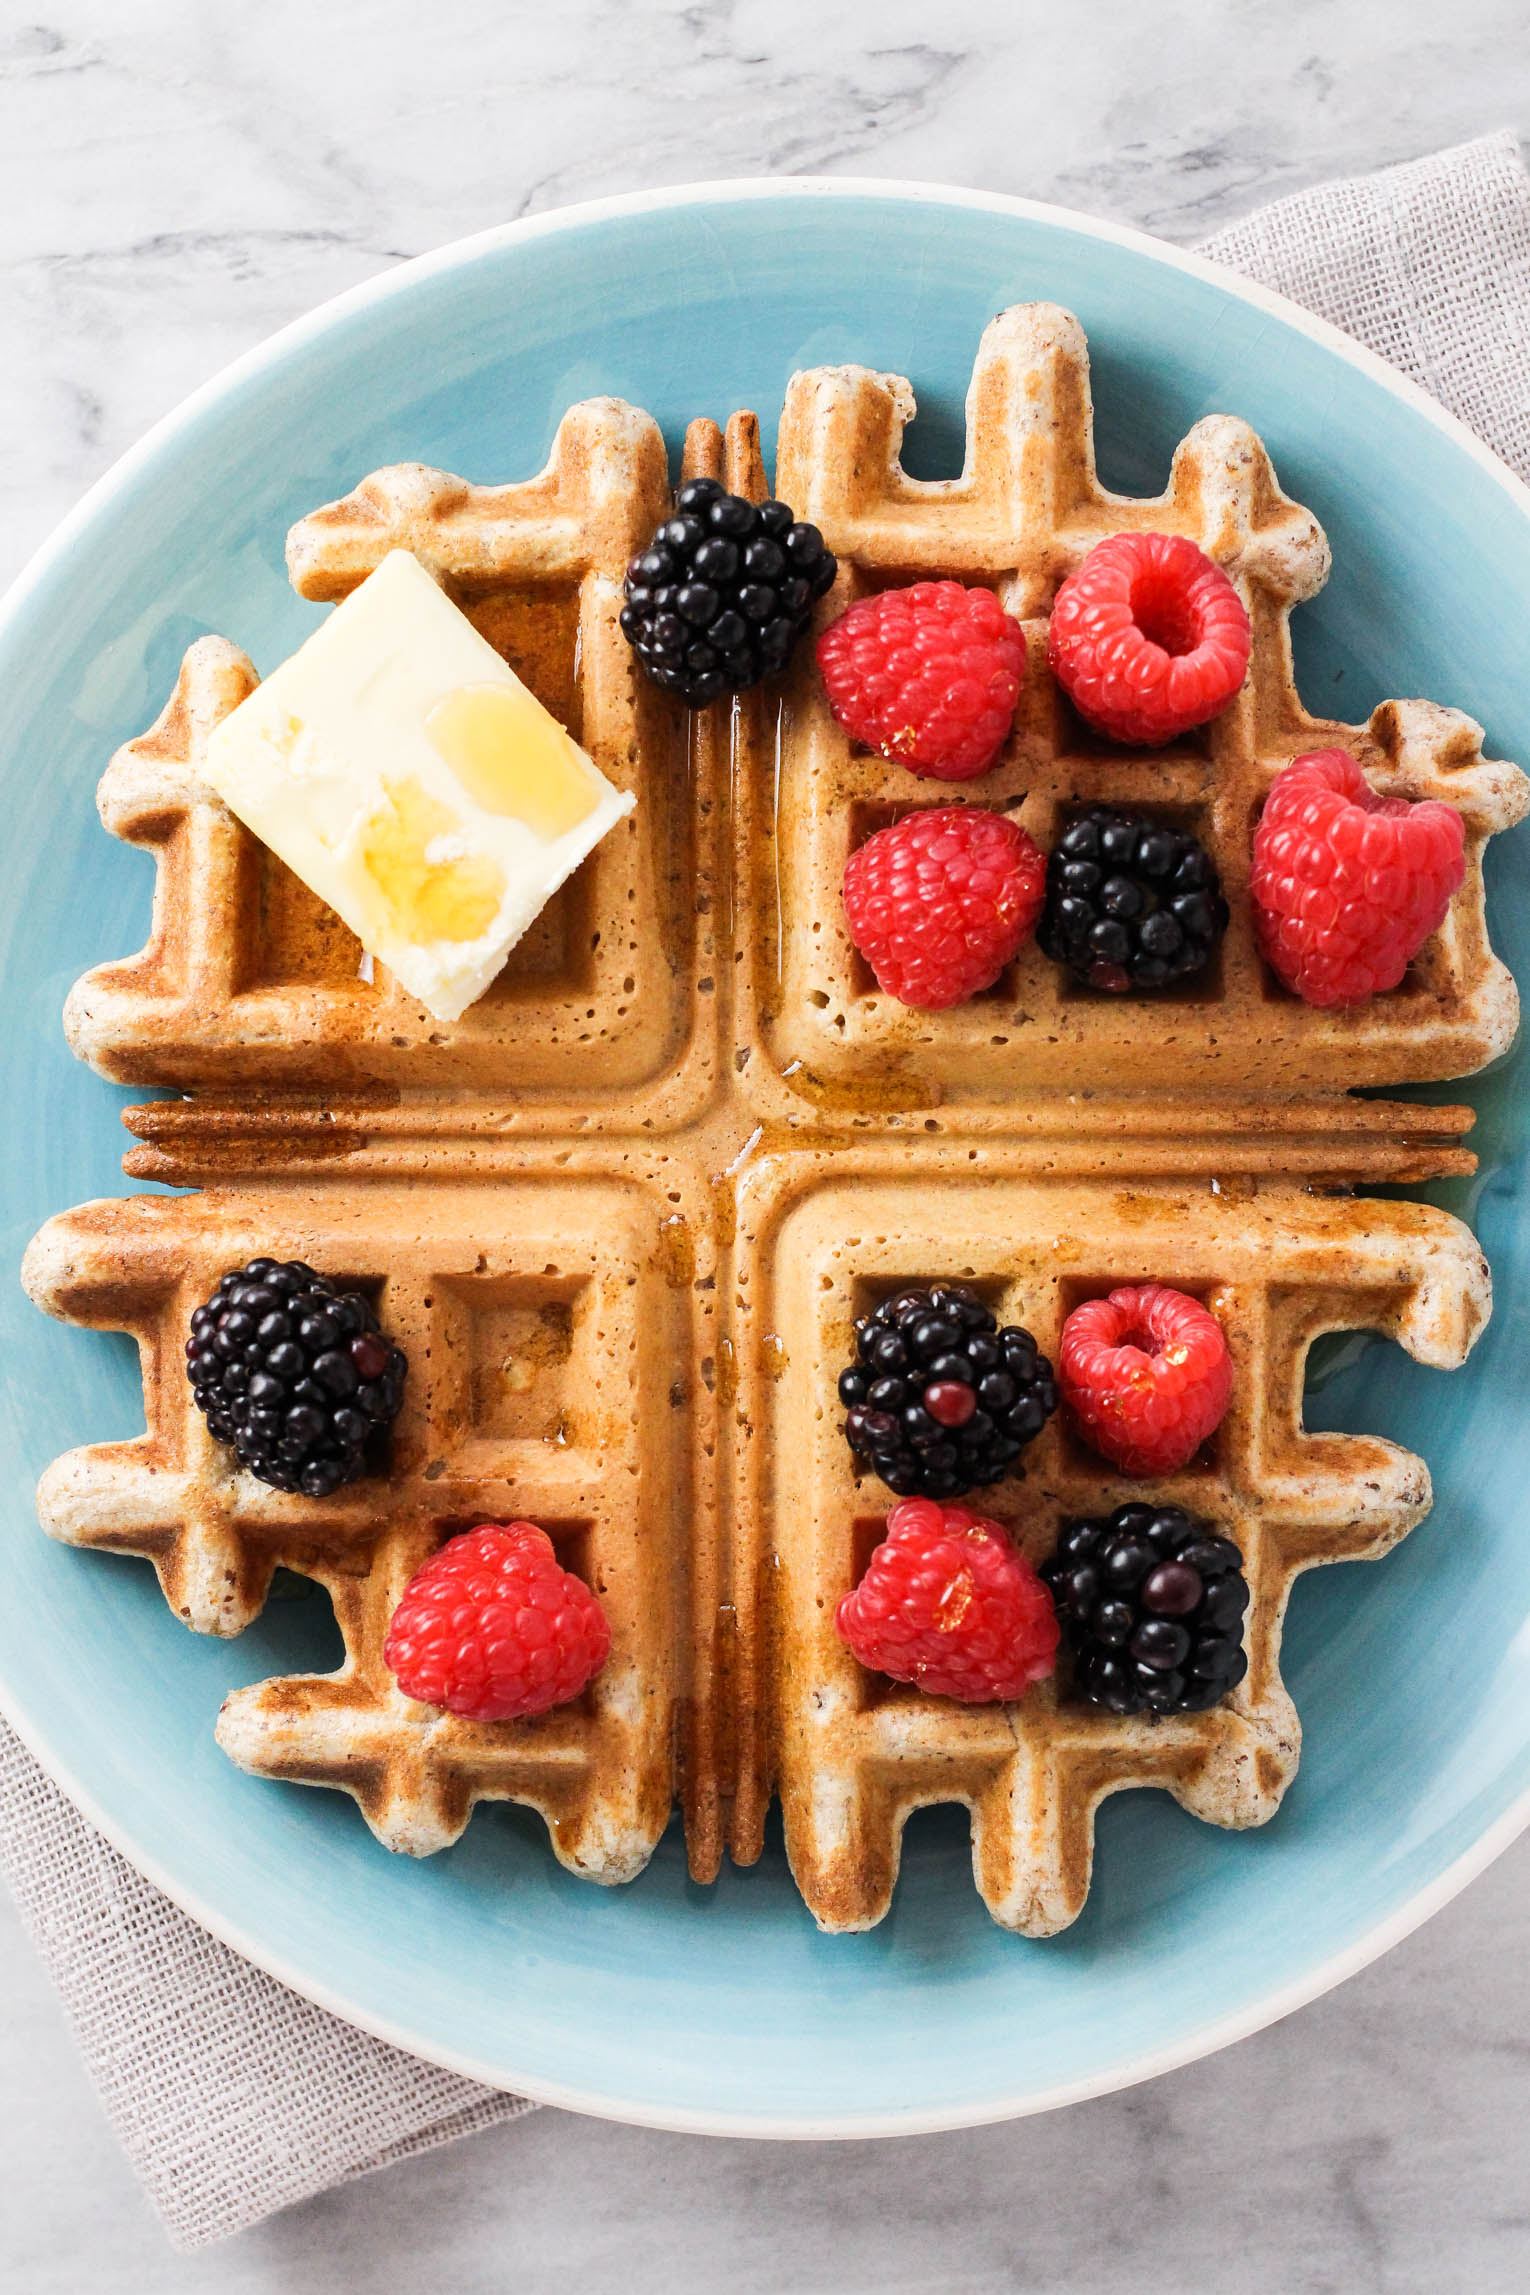 Overhead shot of a whole wheat waffle on a blue plate. The waffle is garnished with berries, butter, and maple syrup. 